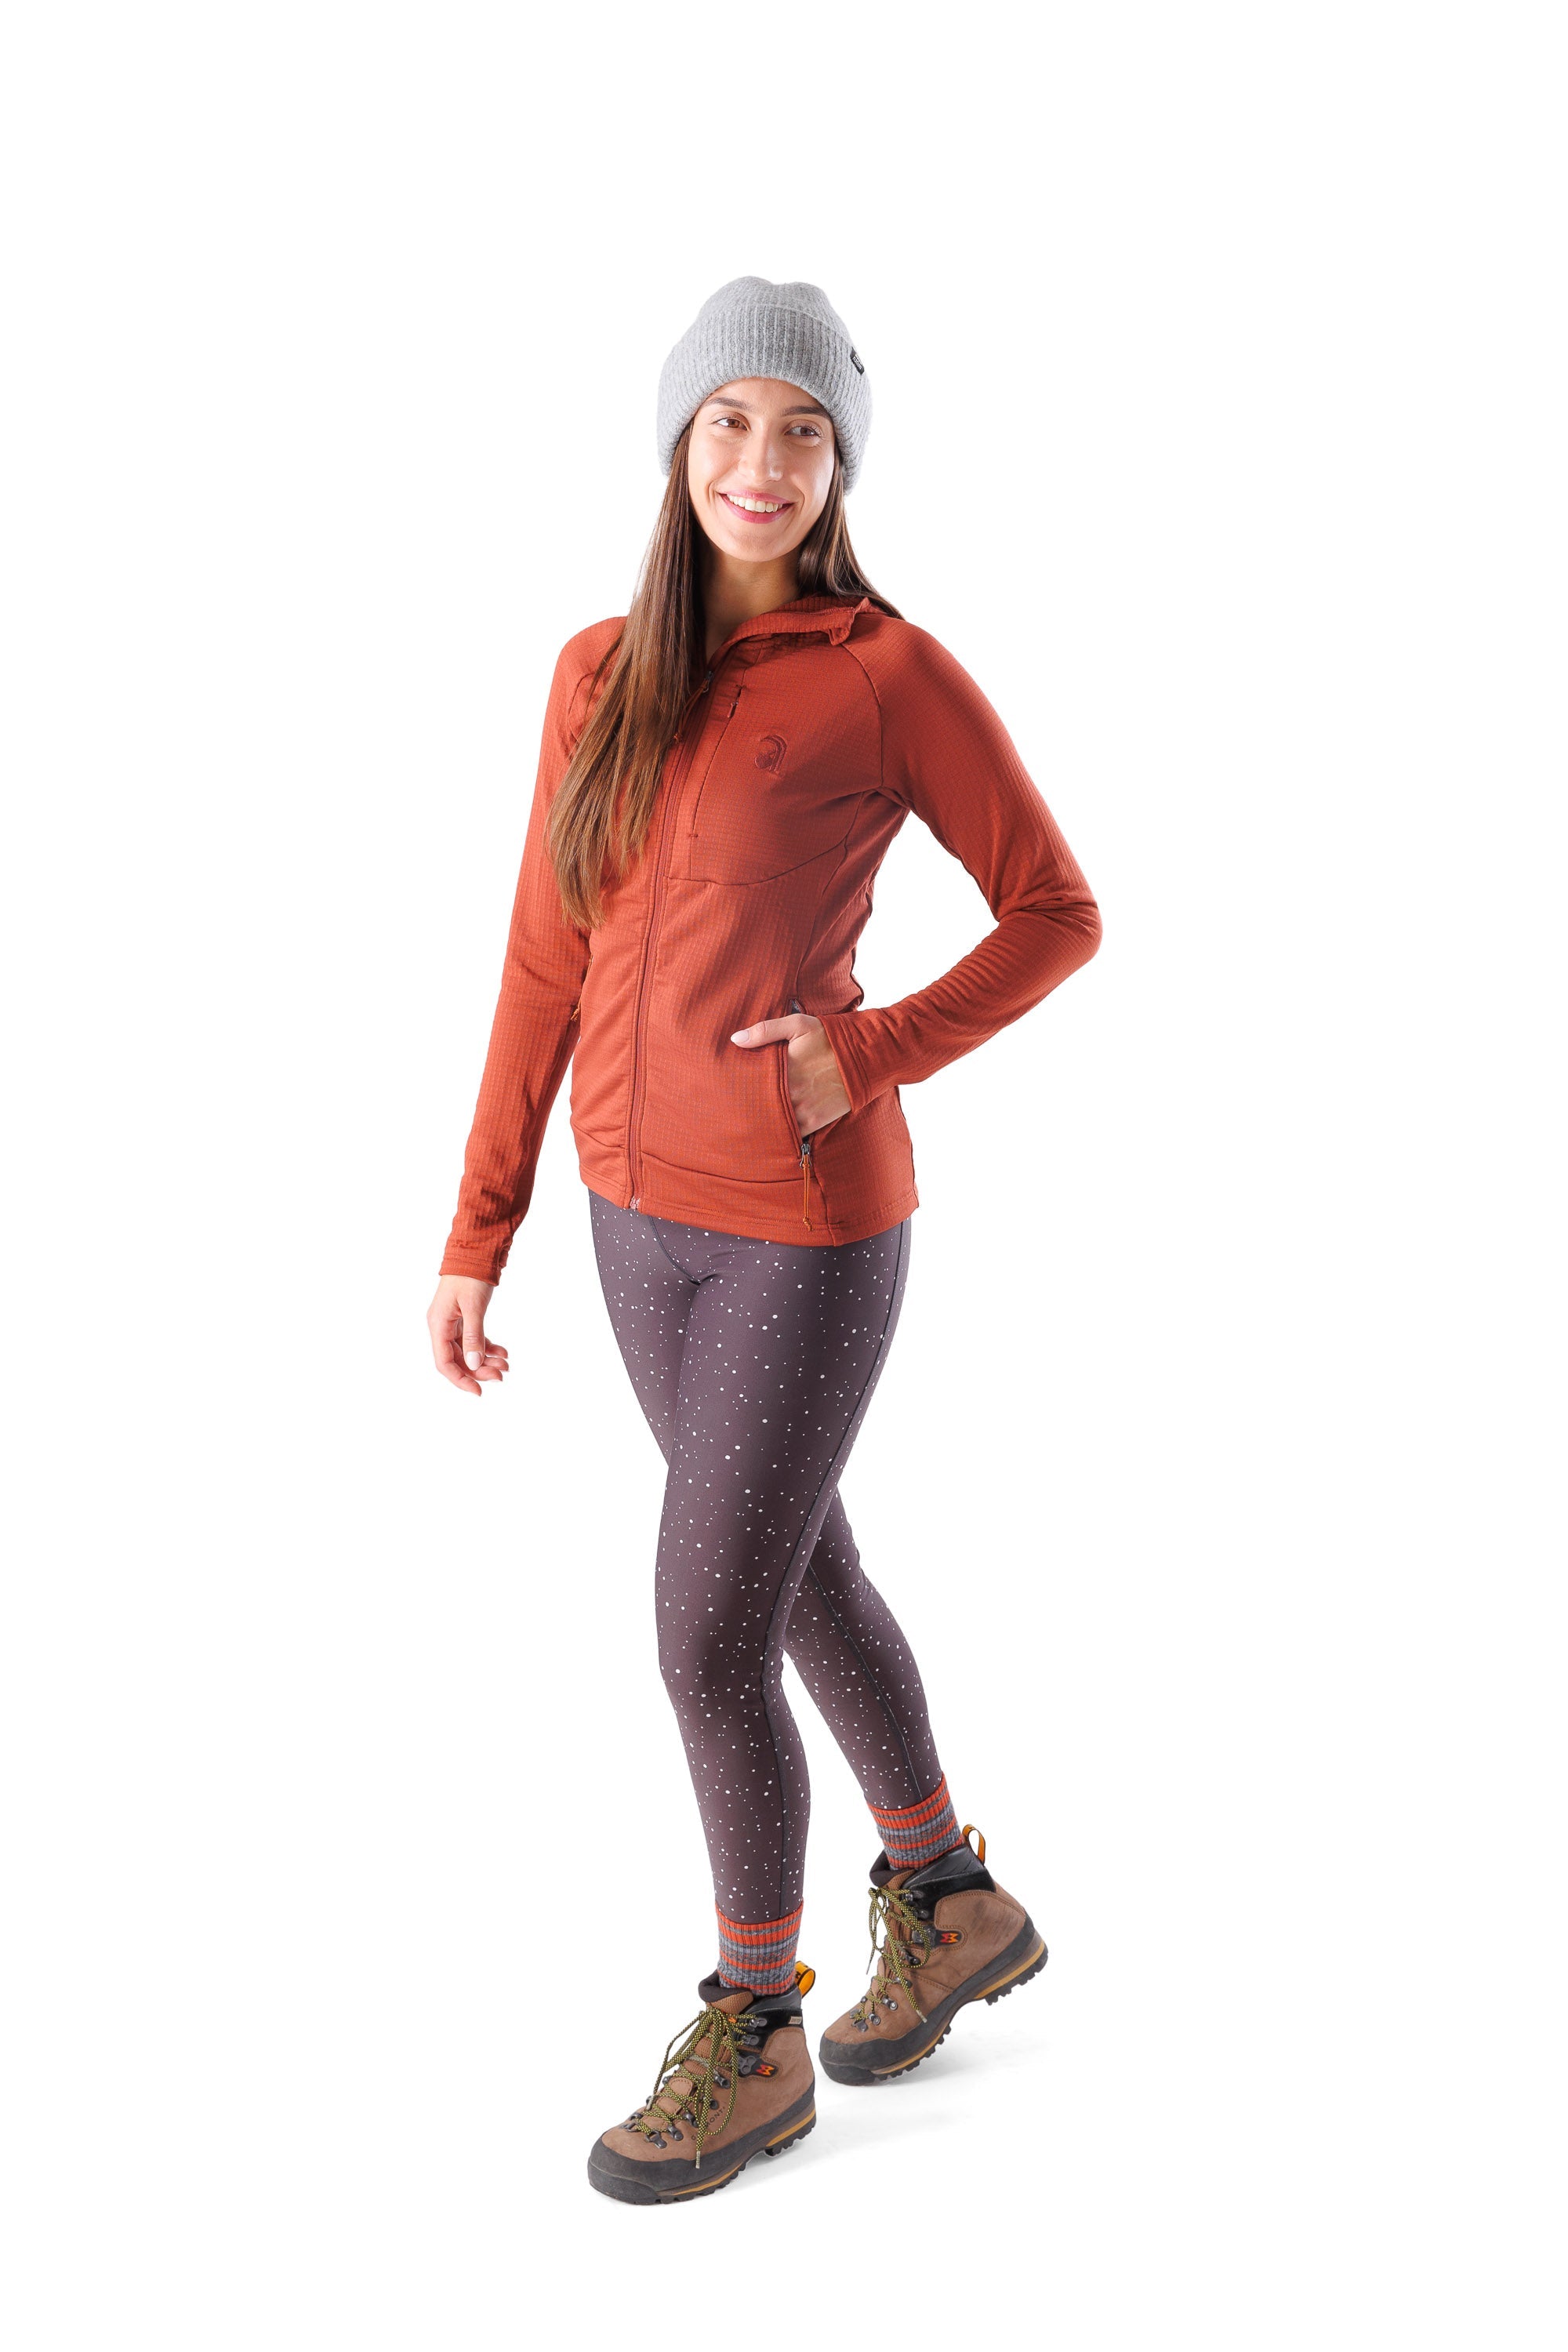 APEX Winter Leggings Blackout - Tall (+7 cm) – Alpine Nation Outdoor  Clothing